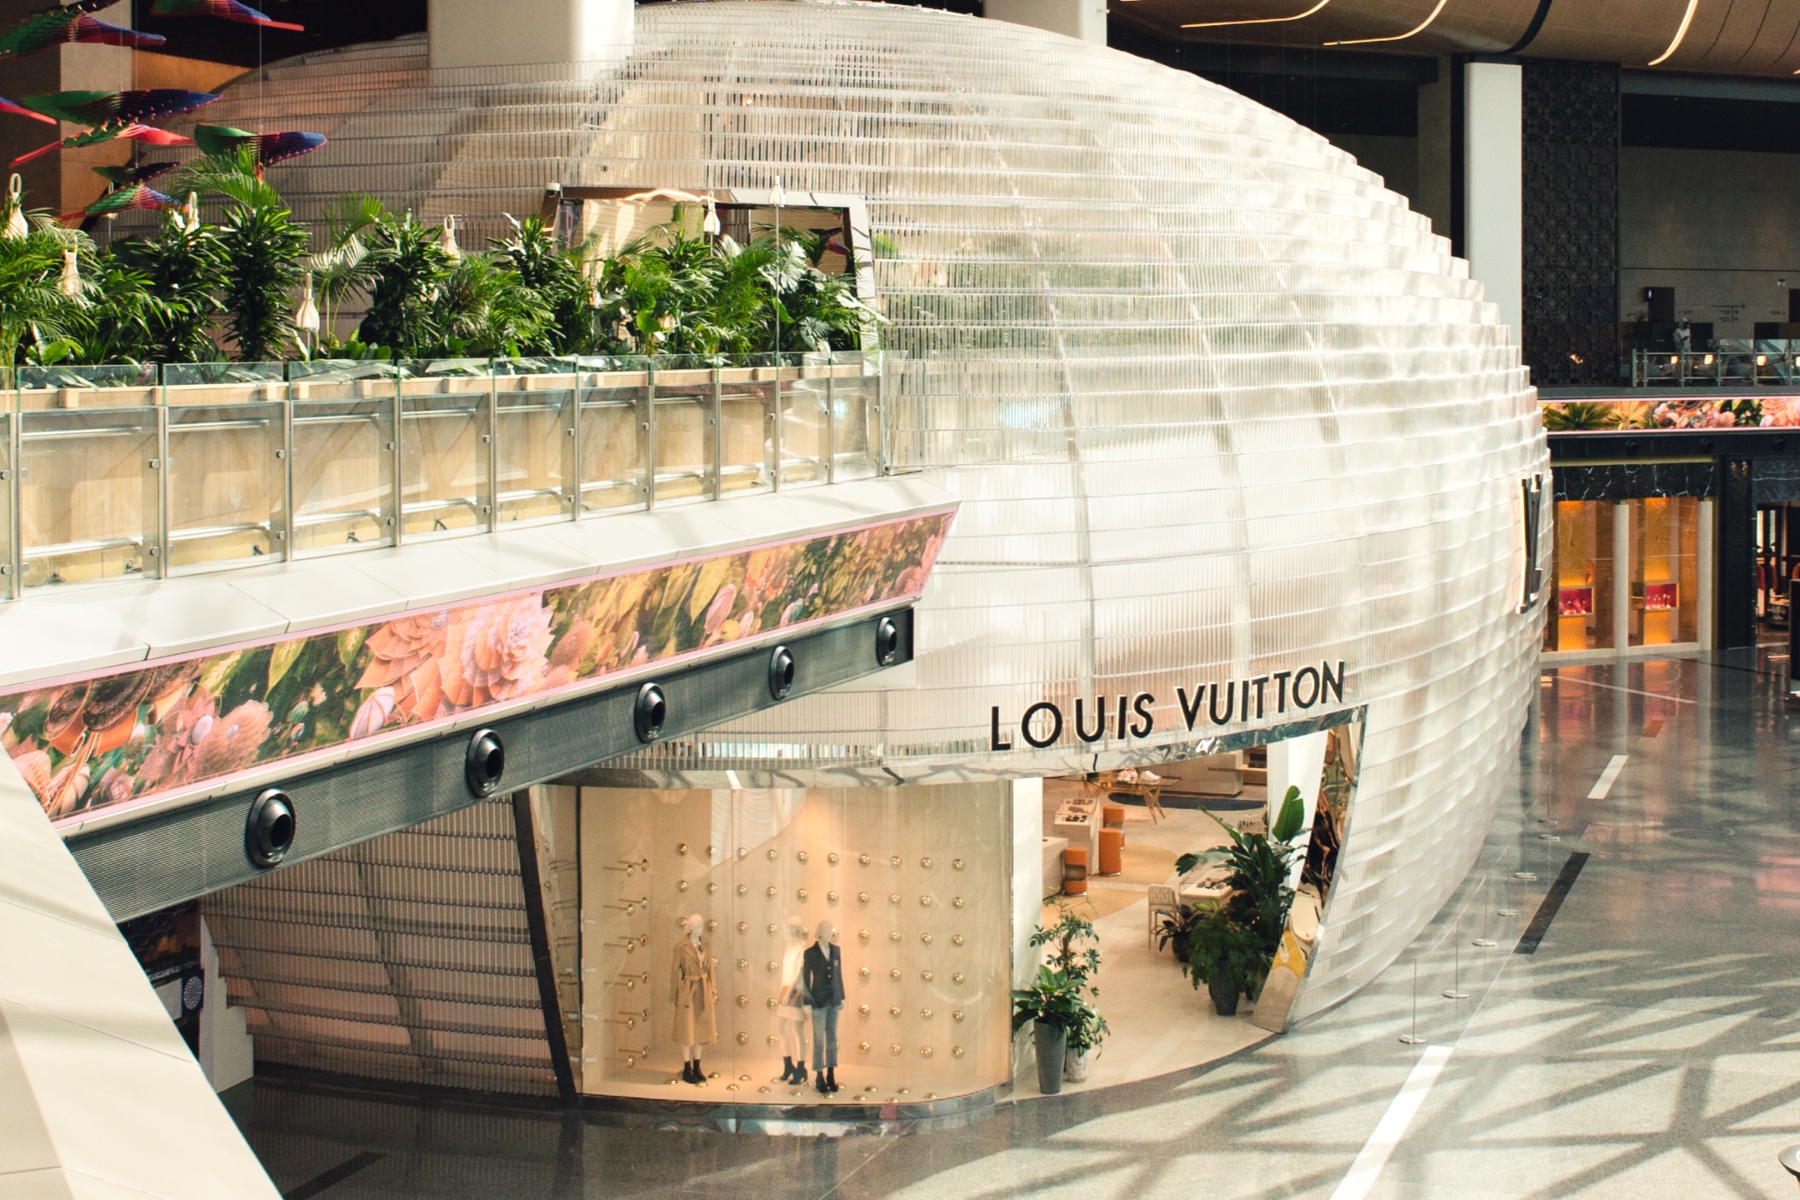 A stylish Louis Vuitton Airport Lounge? We're flying!